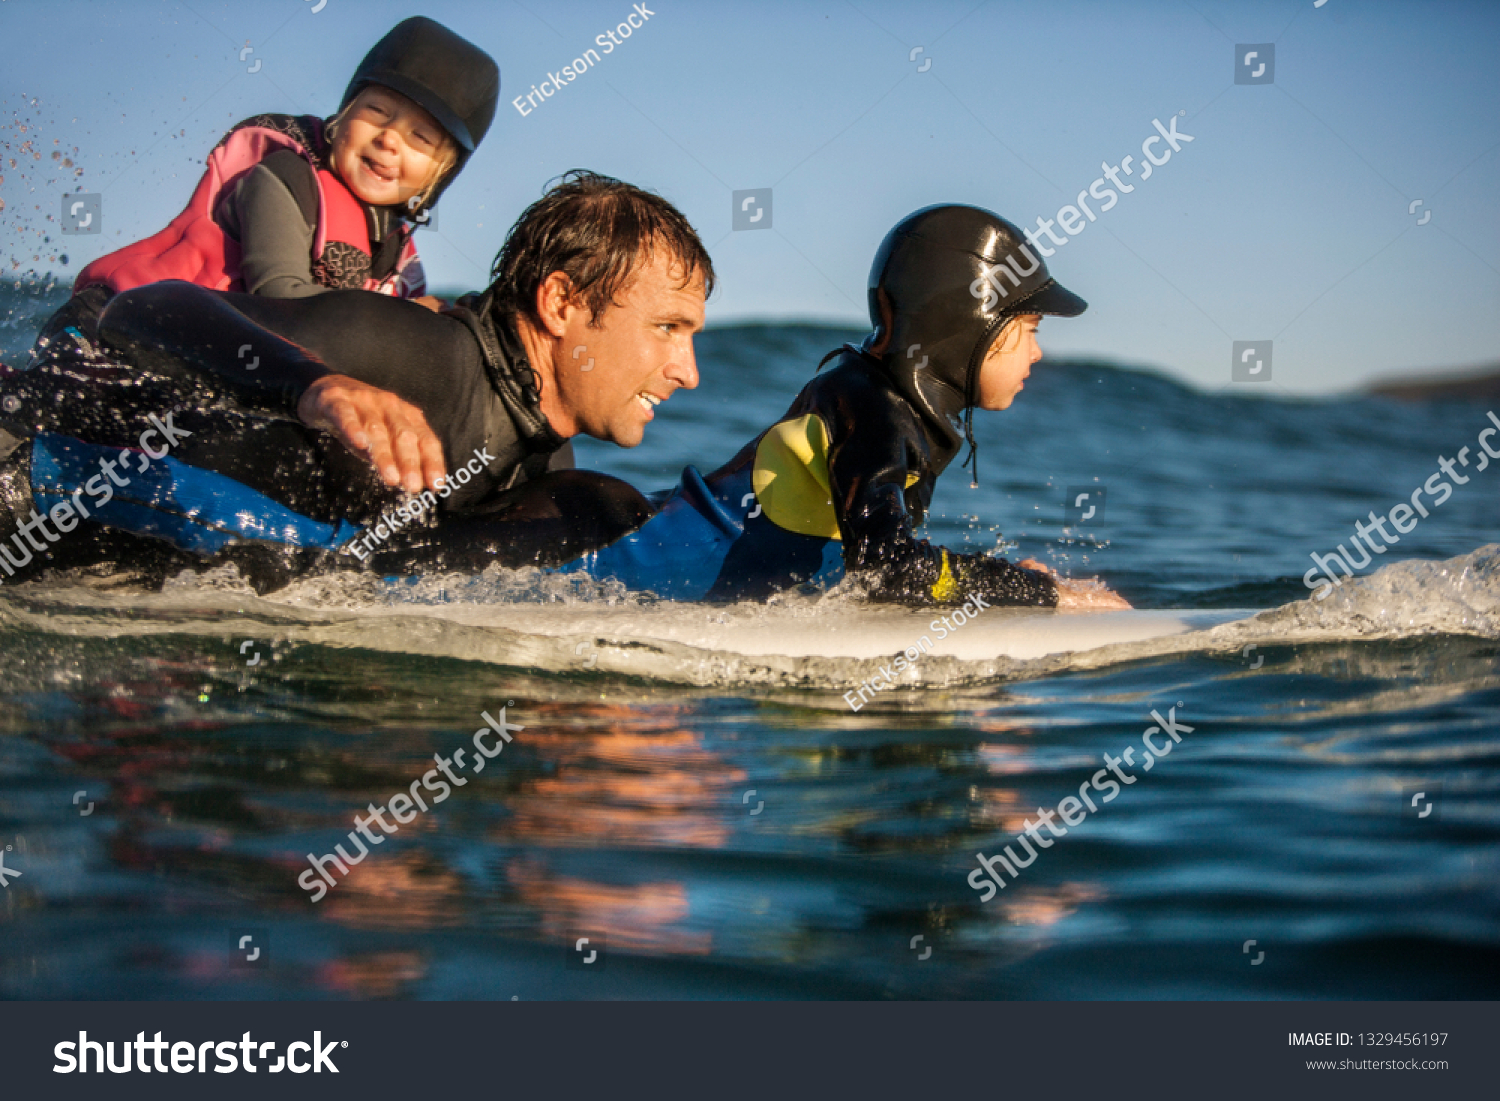 Middle aged man surfing with his two young daughters. #1329456197